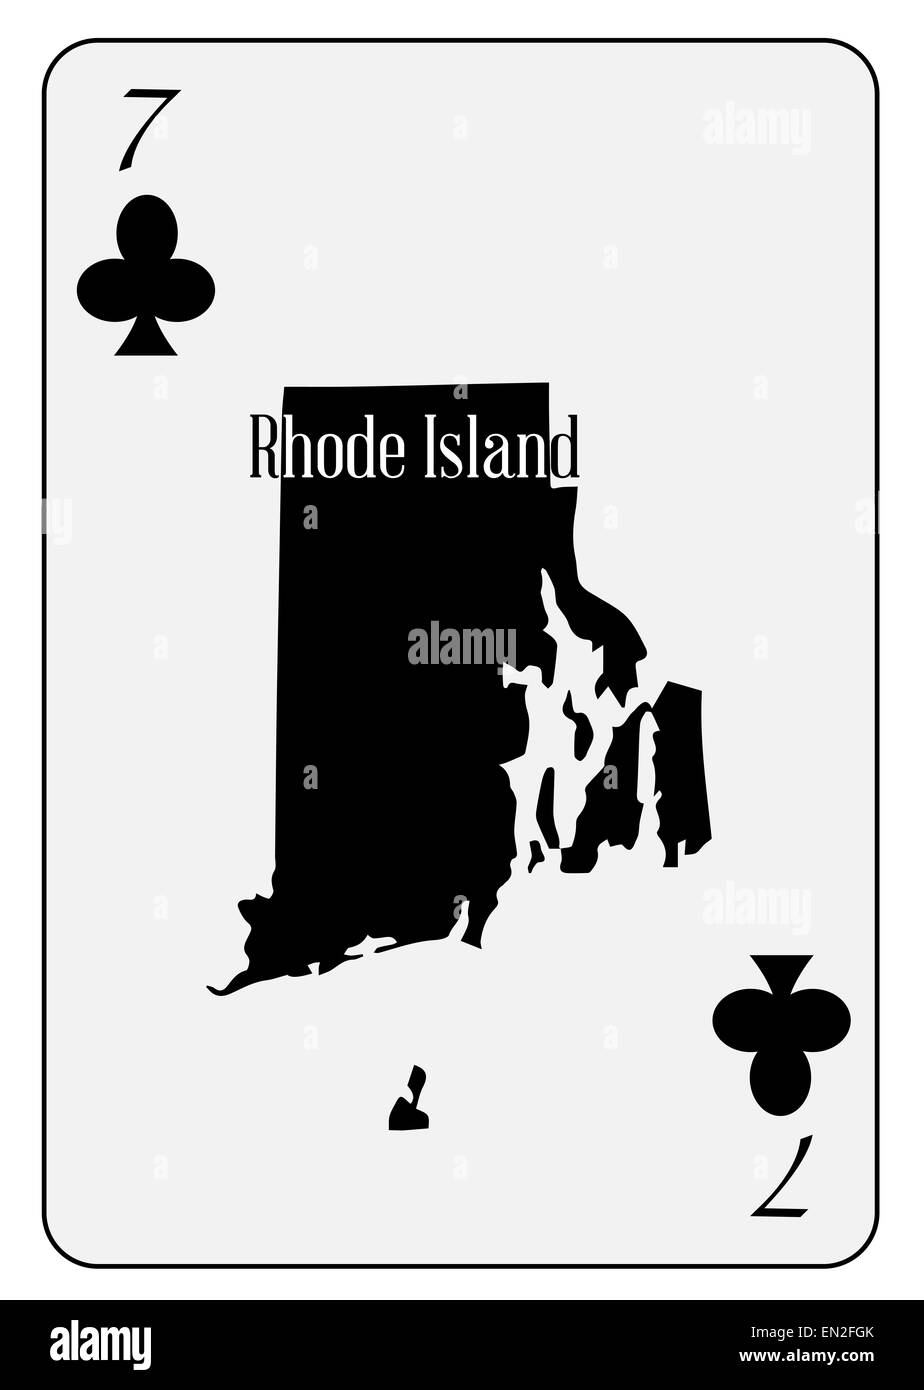 Outline map of Rhode Island and used as the 7 of Clubs motif in a playing card Stock Photo